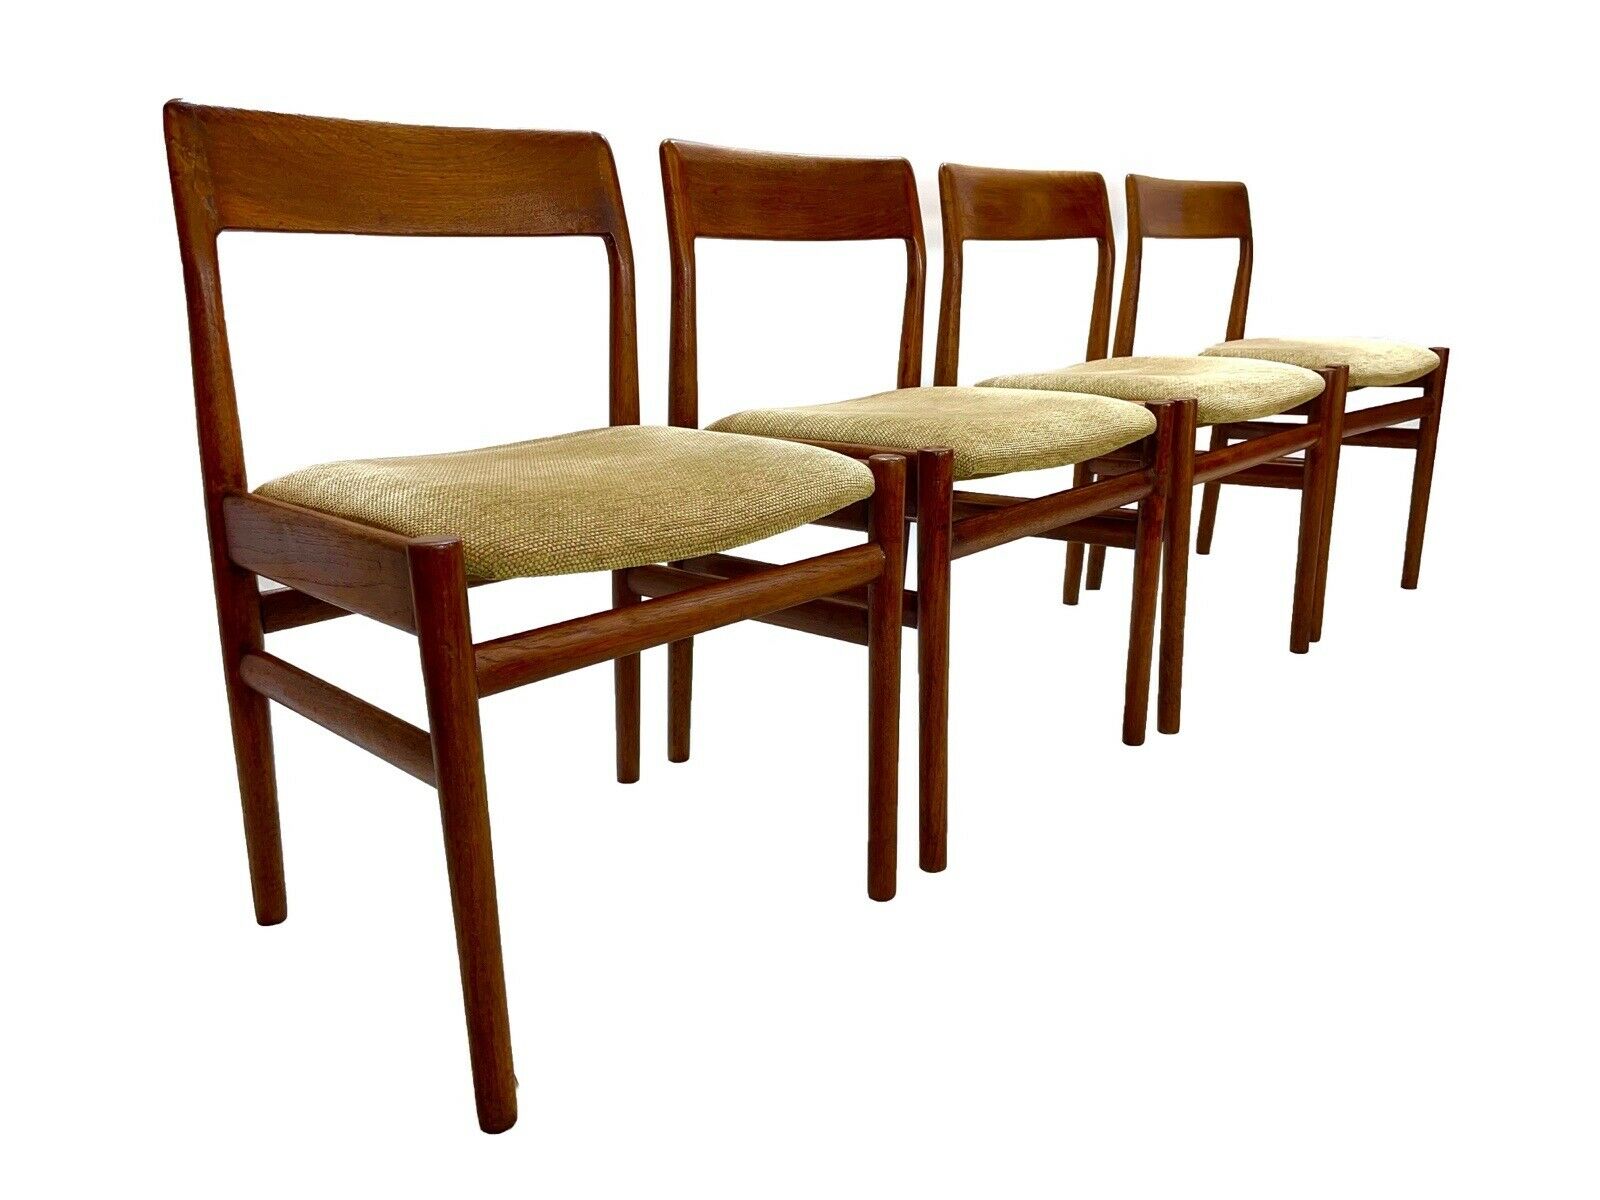 Dalescraft, Mid Century Modern, Set Of 4 Dining Chairs - Danish Style